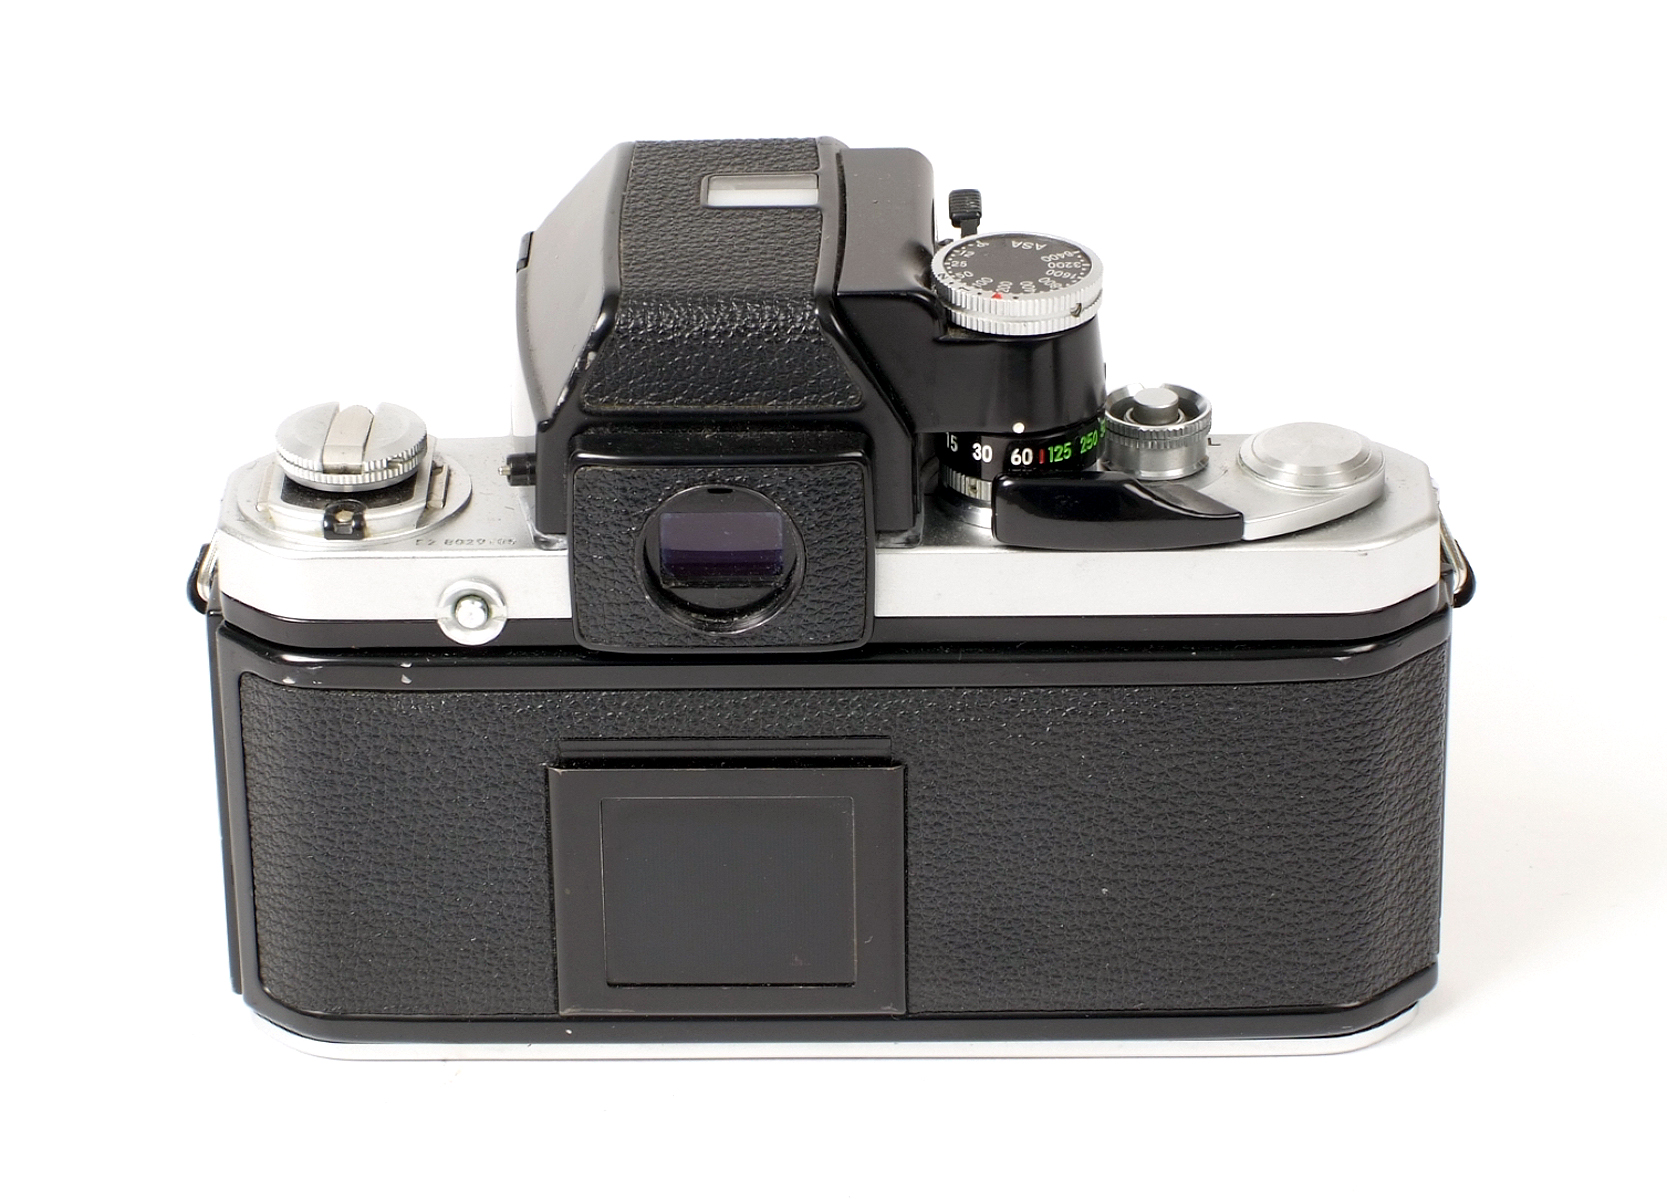 Pair of Nikon F2A Photomic Camera Bodies. - Image 4 of 7